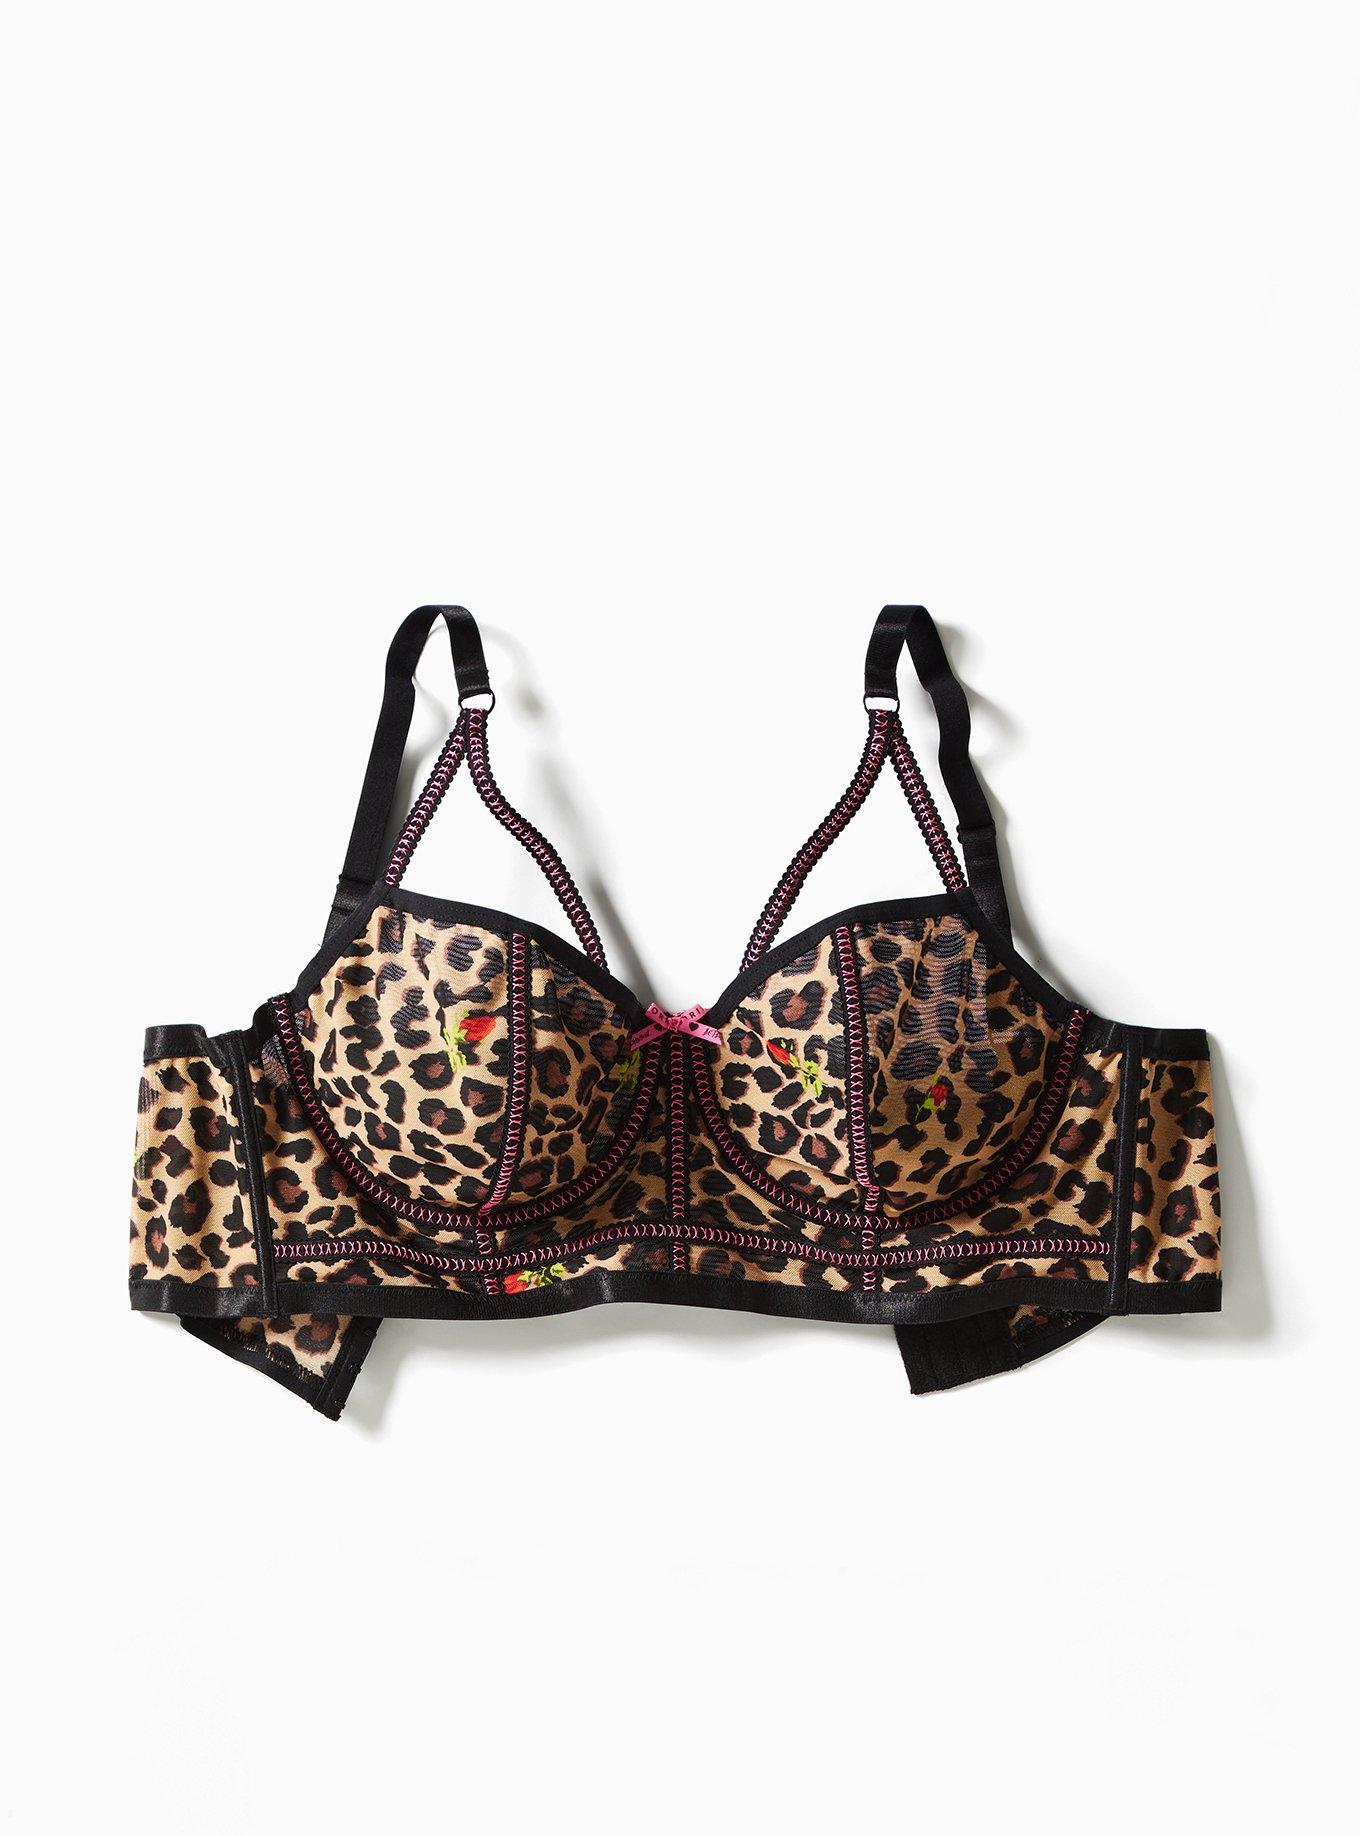 NWT TORRID Strappy Push-Up STRAPLESS Bra Lace Leopard Size 40 D SEXY  Multi-way